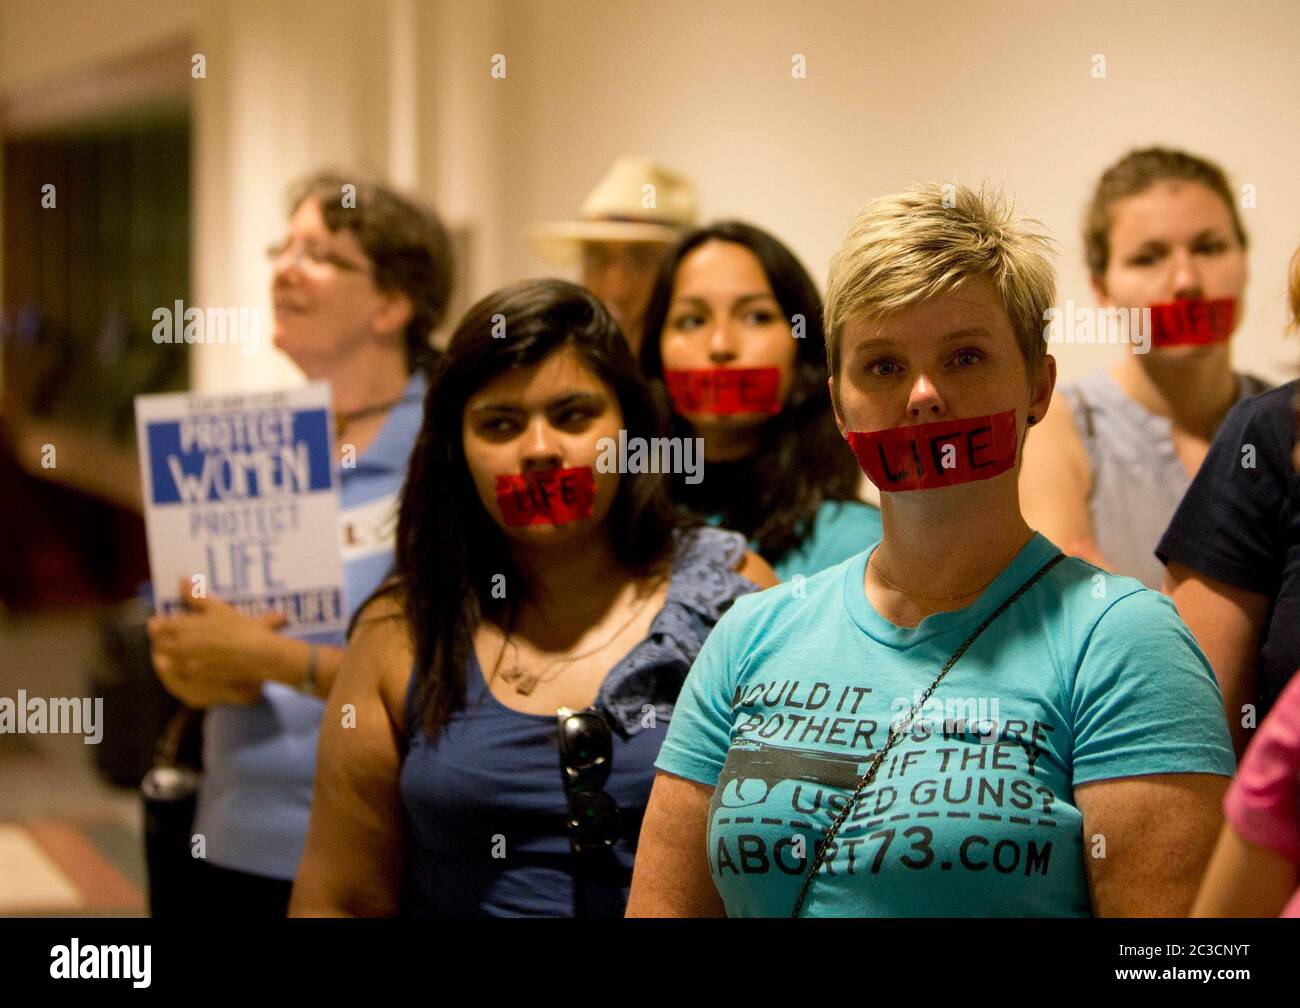 July 2, 2013 Austin, Texas USA: During competing rallies at the Texas Capitol, pro-life activists show their support for anti-abortion legislation as the House Committee on State Affairs holds hearings on a controversial abortion bill. ©MKC/Bob Daemmrich Photography, Inc. Stock Photo